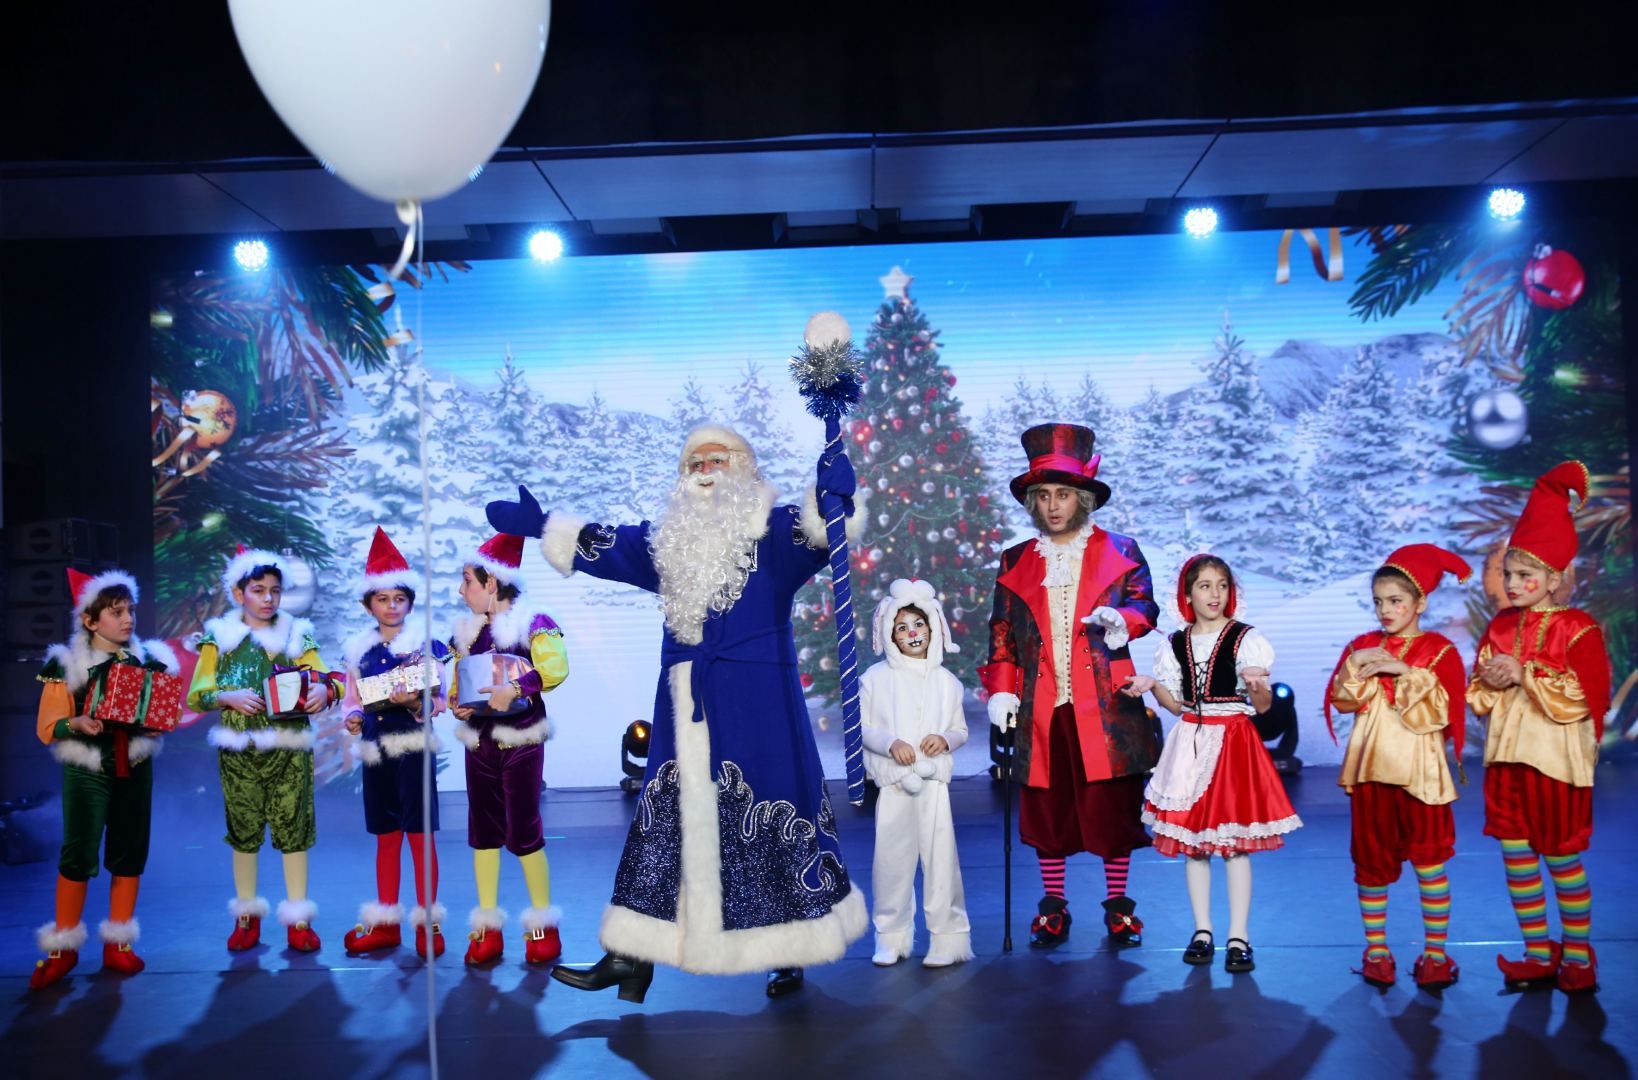 Heydar Aliyev Foundation holds festive event for children in need of special care [PHOTO]